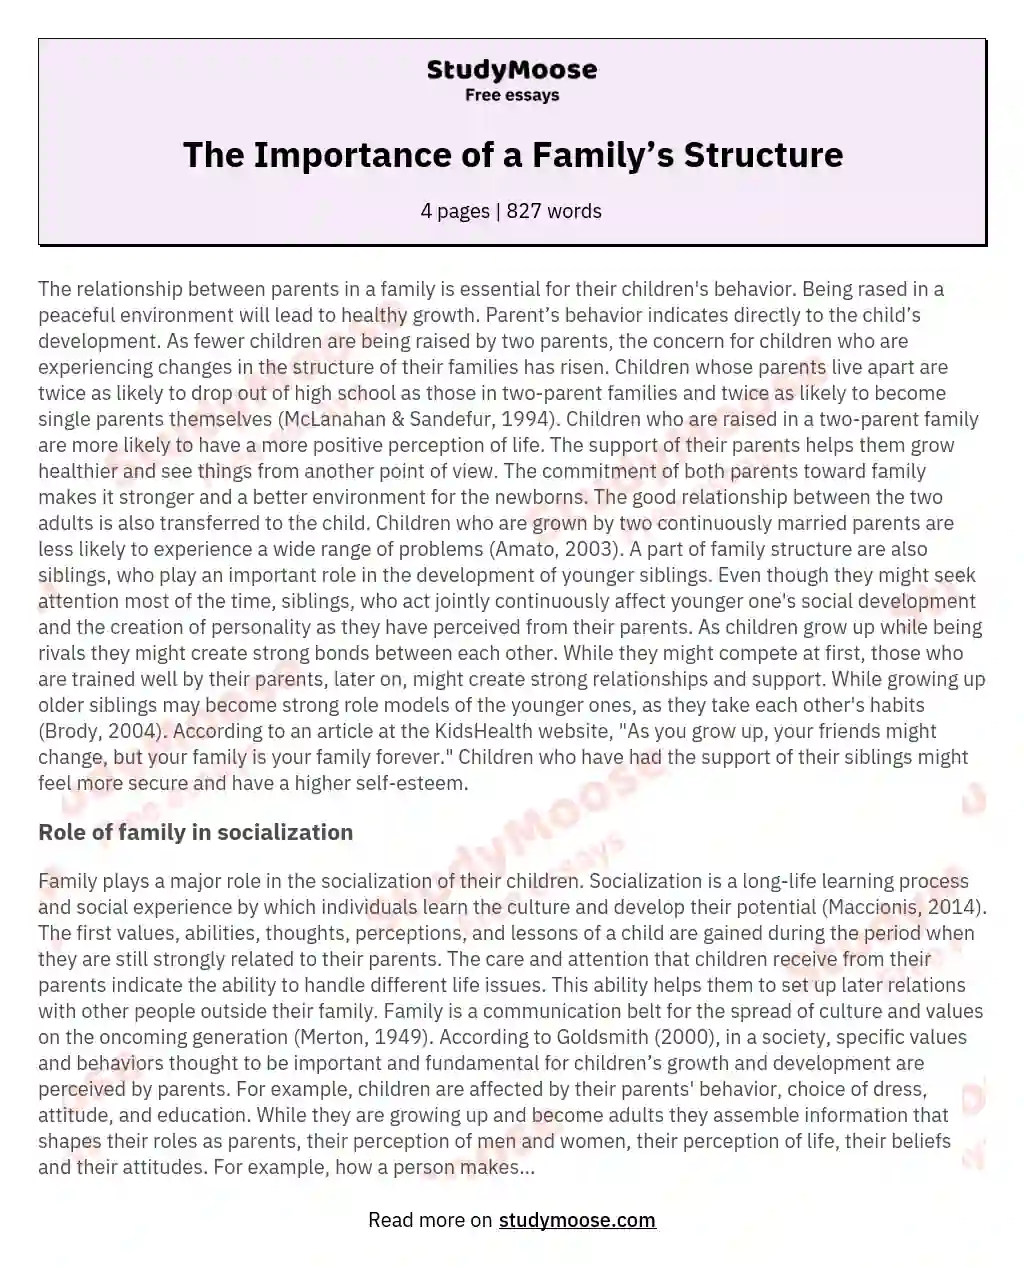 The Importance of a Family’s Structure essay